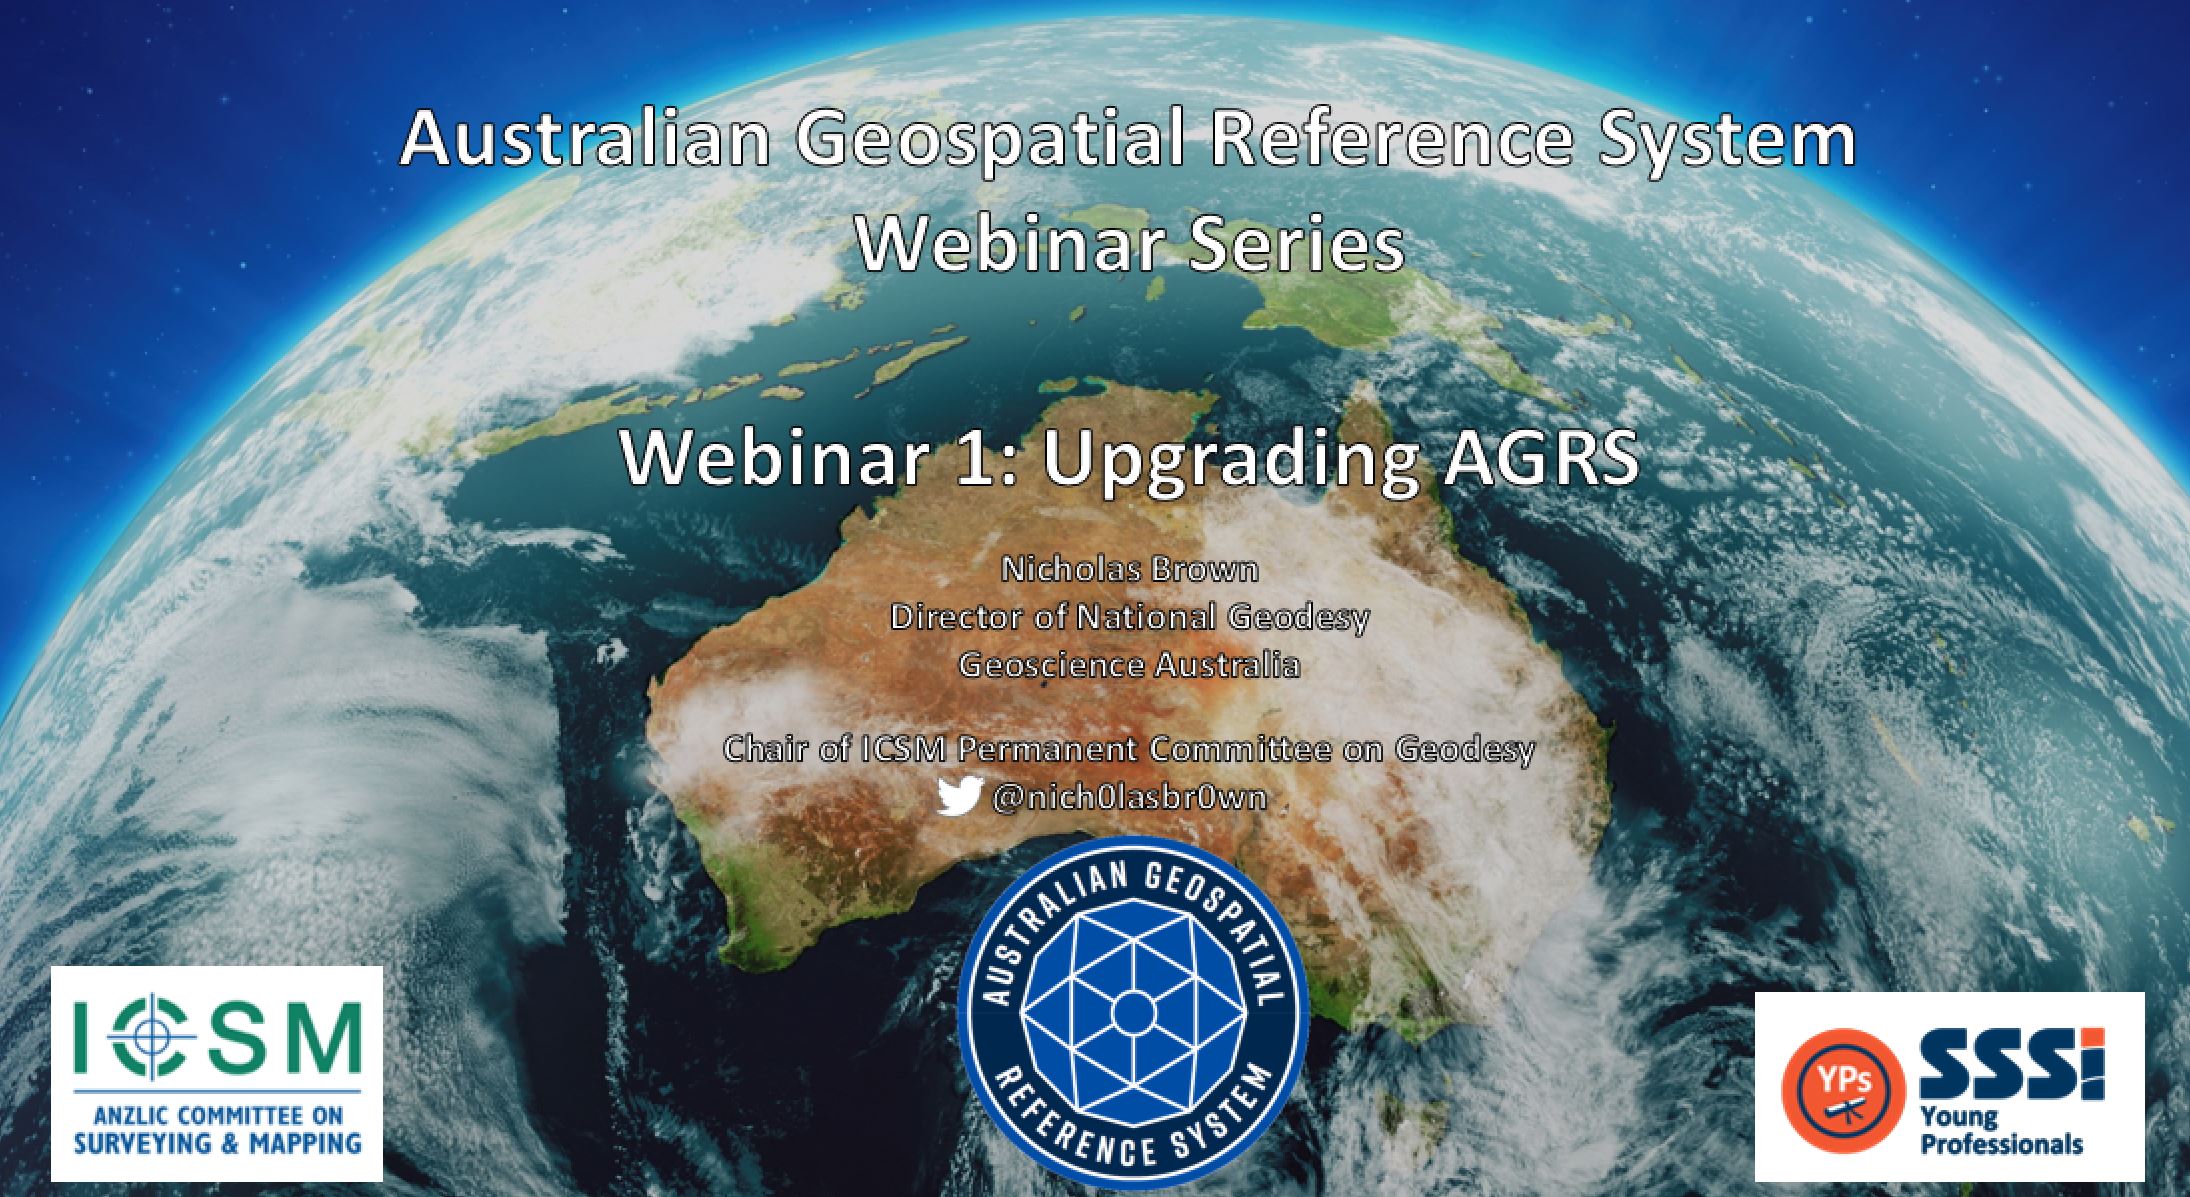 Image of Australia with title of webinar on it